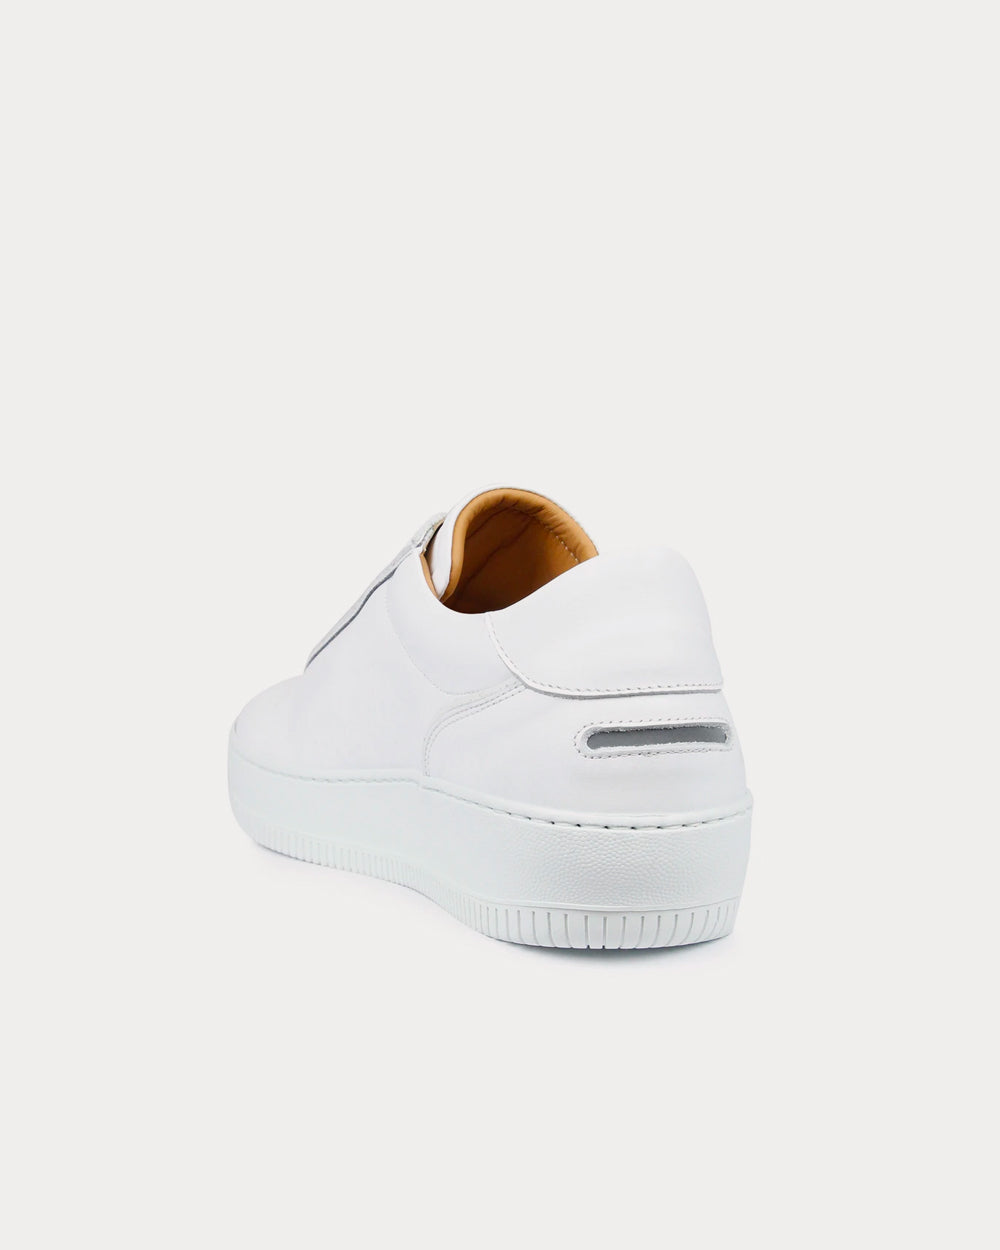 Unseen Footwear - Clement Leather Tonal White Low Top Sneakers